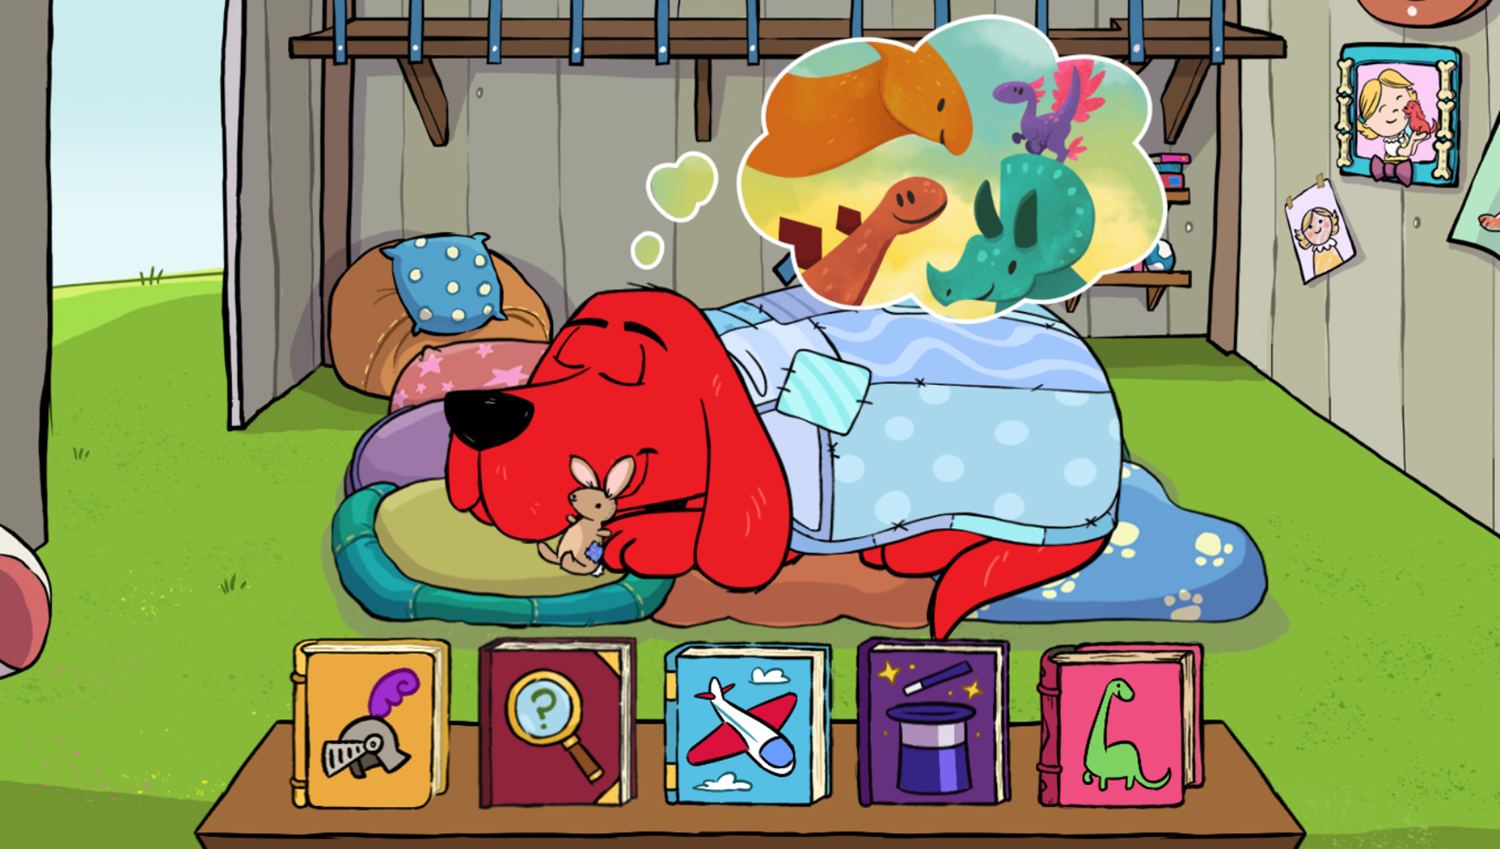 Clifford the Big Red Dog: A Dog's Life Reading Result Screenshot.